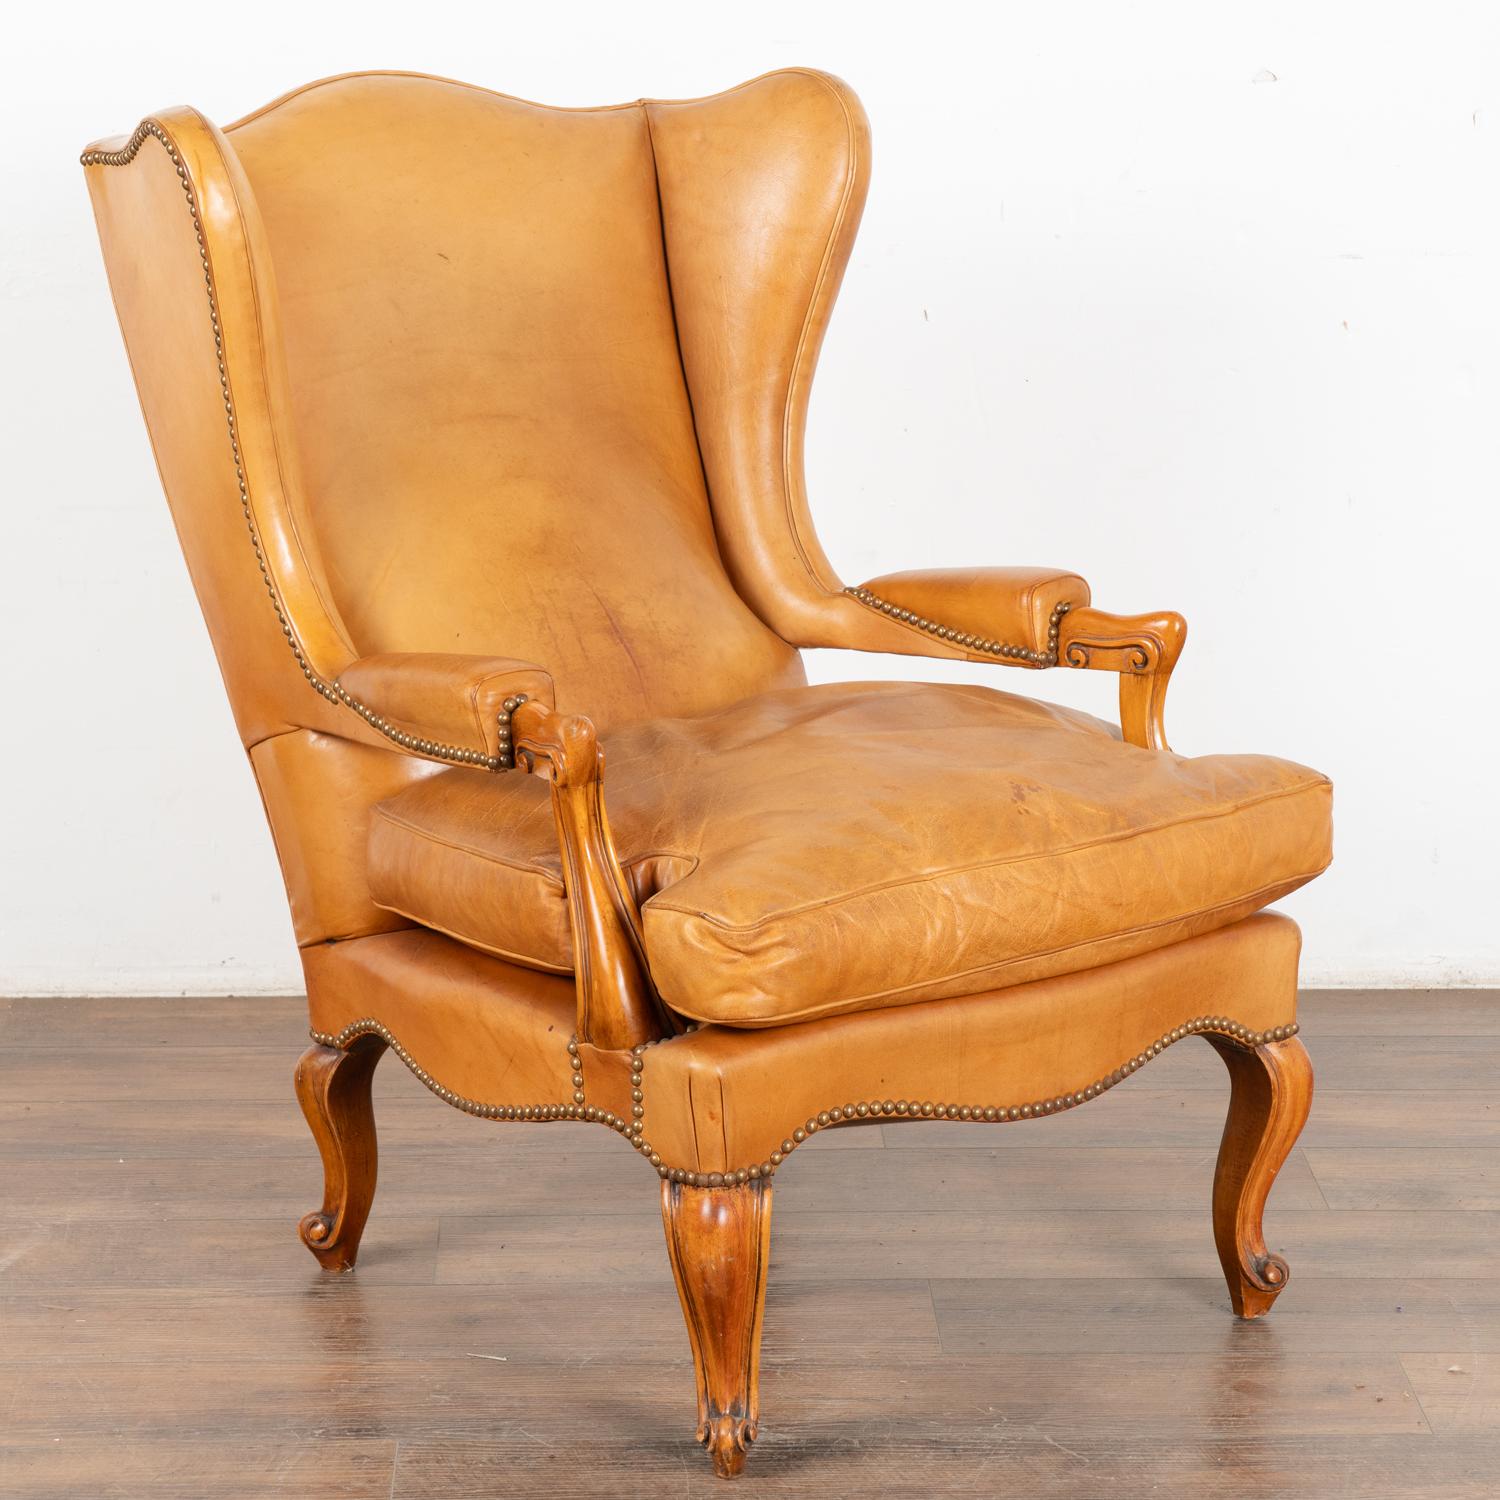 Vintage brown leather wingback arm chair with classic nail head trim resting on cabriolet feet.
Carmel colored leather shows stains to seat, some cracking at center lower back.
Sold in vintage used condition. Frame is solid/stable and sits